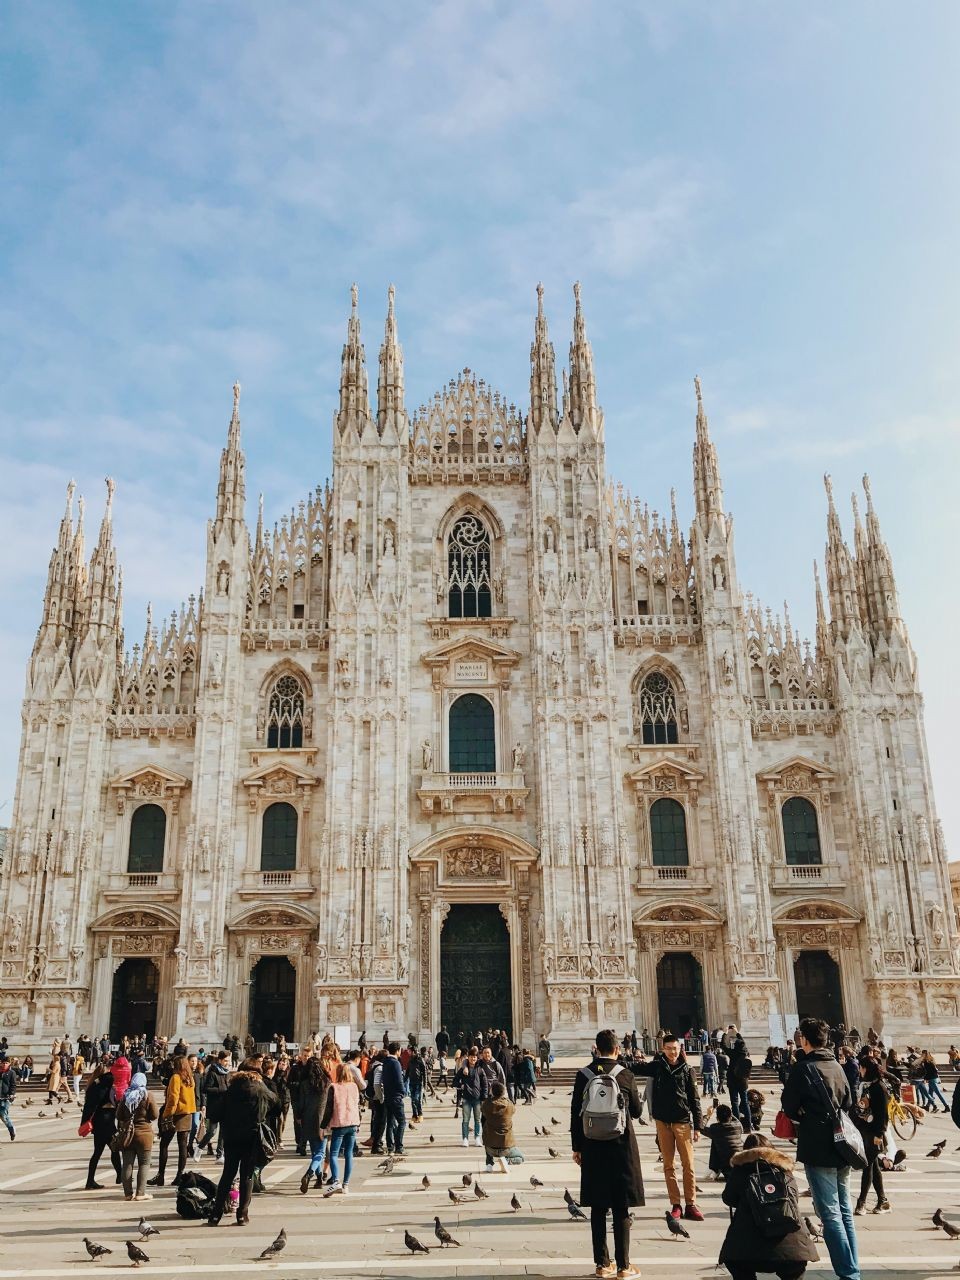 Duomo di Milano: One of the most iconic landmarks in Milan, the Duomo di Milano is a stunning cathedral that took almost six centuries to complete